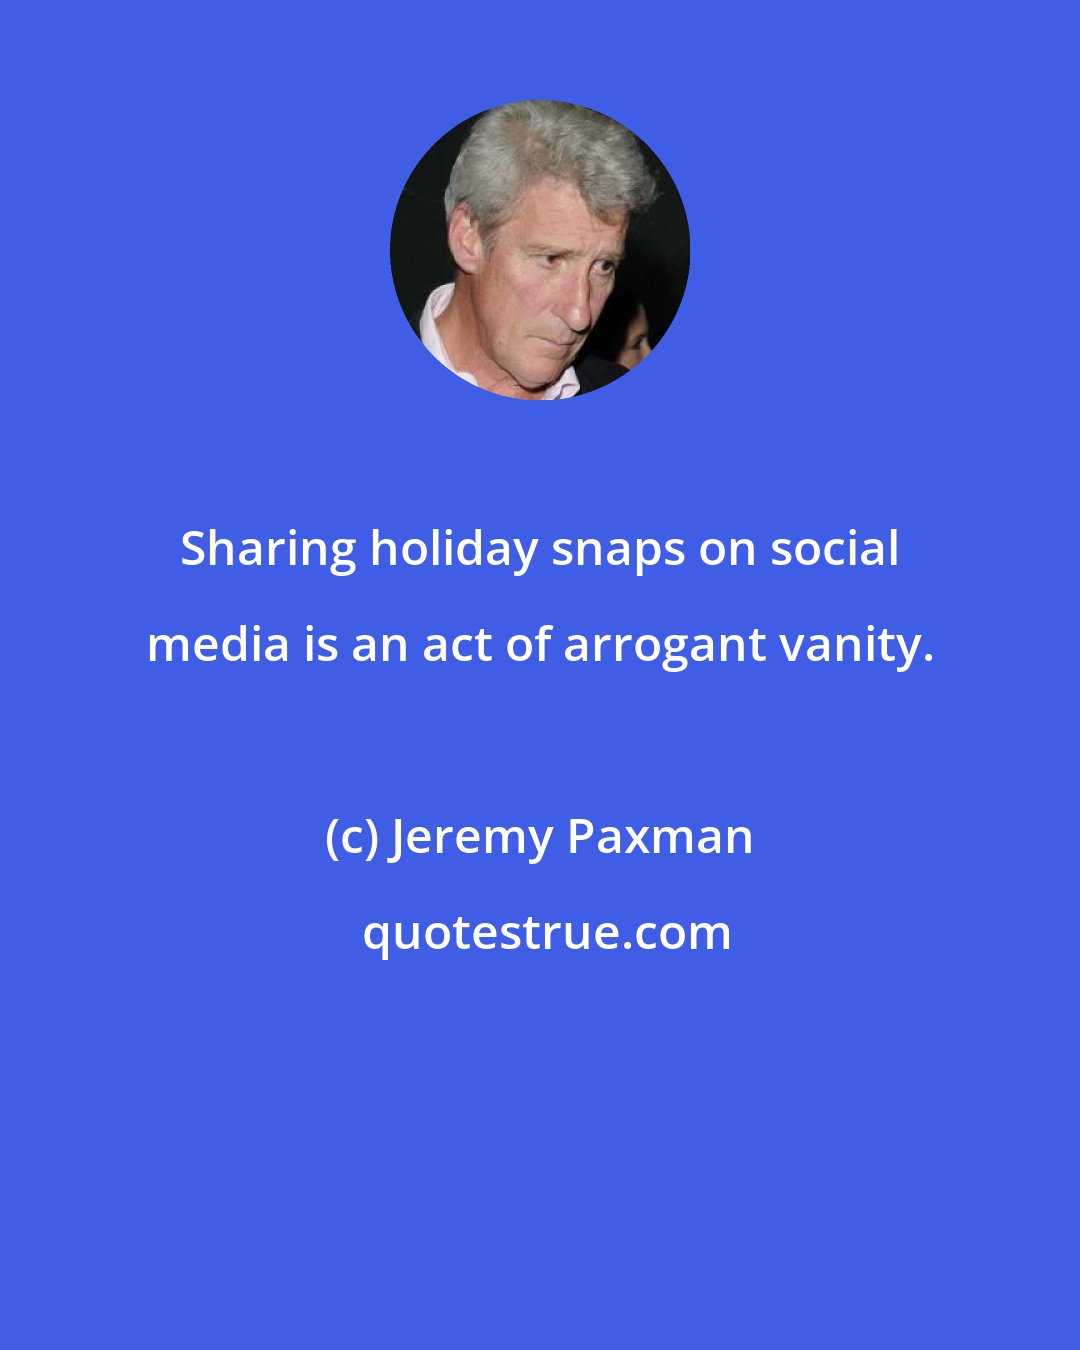 Jeremy Paxman: Sharing holiday snaps on social media is an act of arrogant vanity.